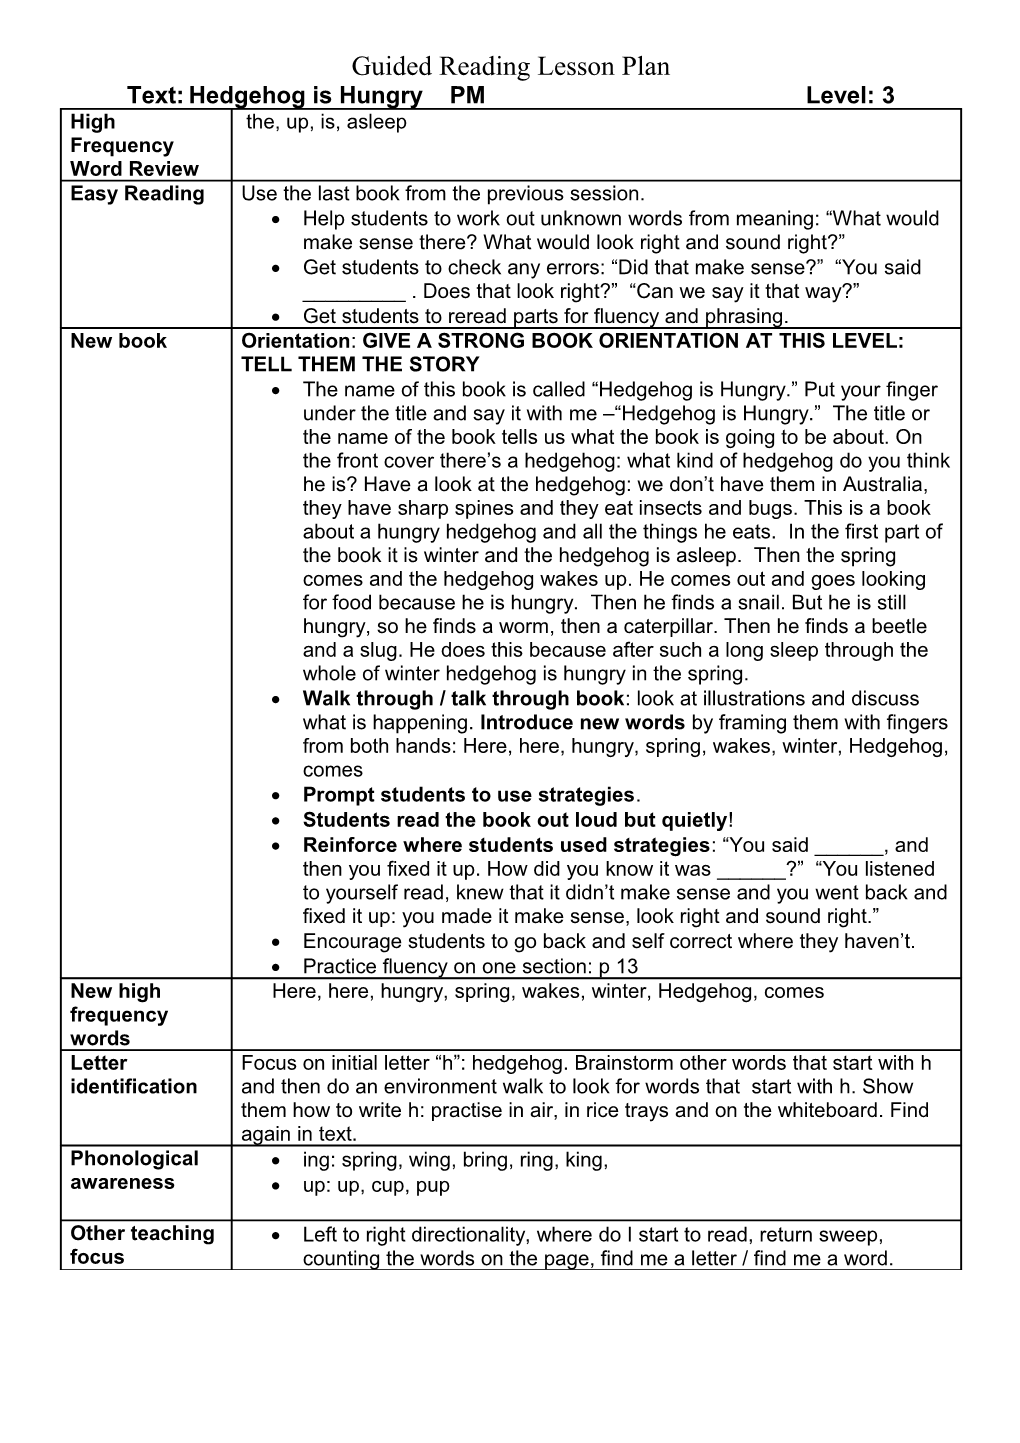 Guided Reading Lesson Plan s2